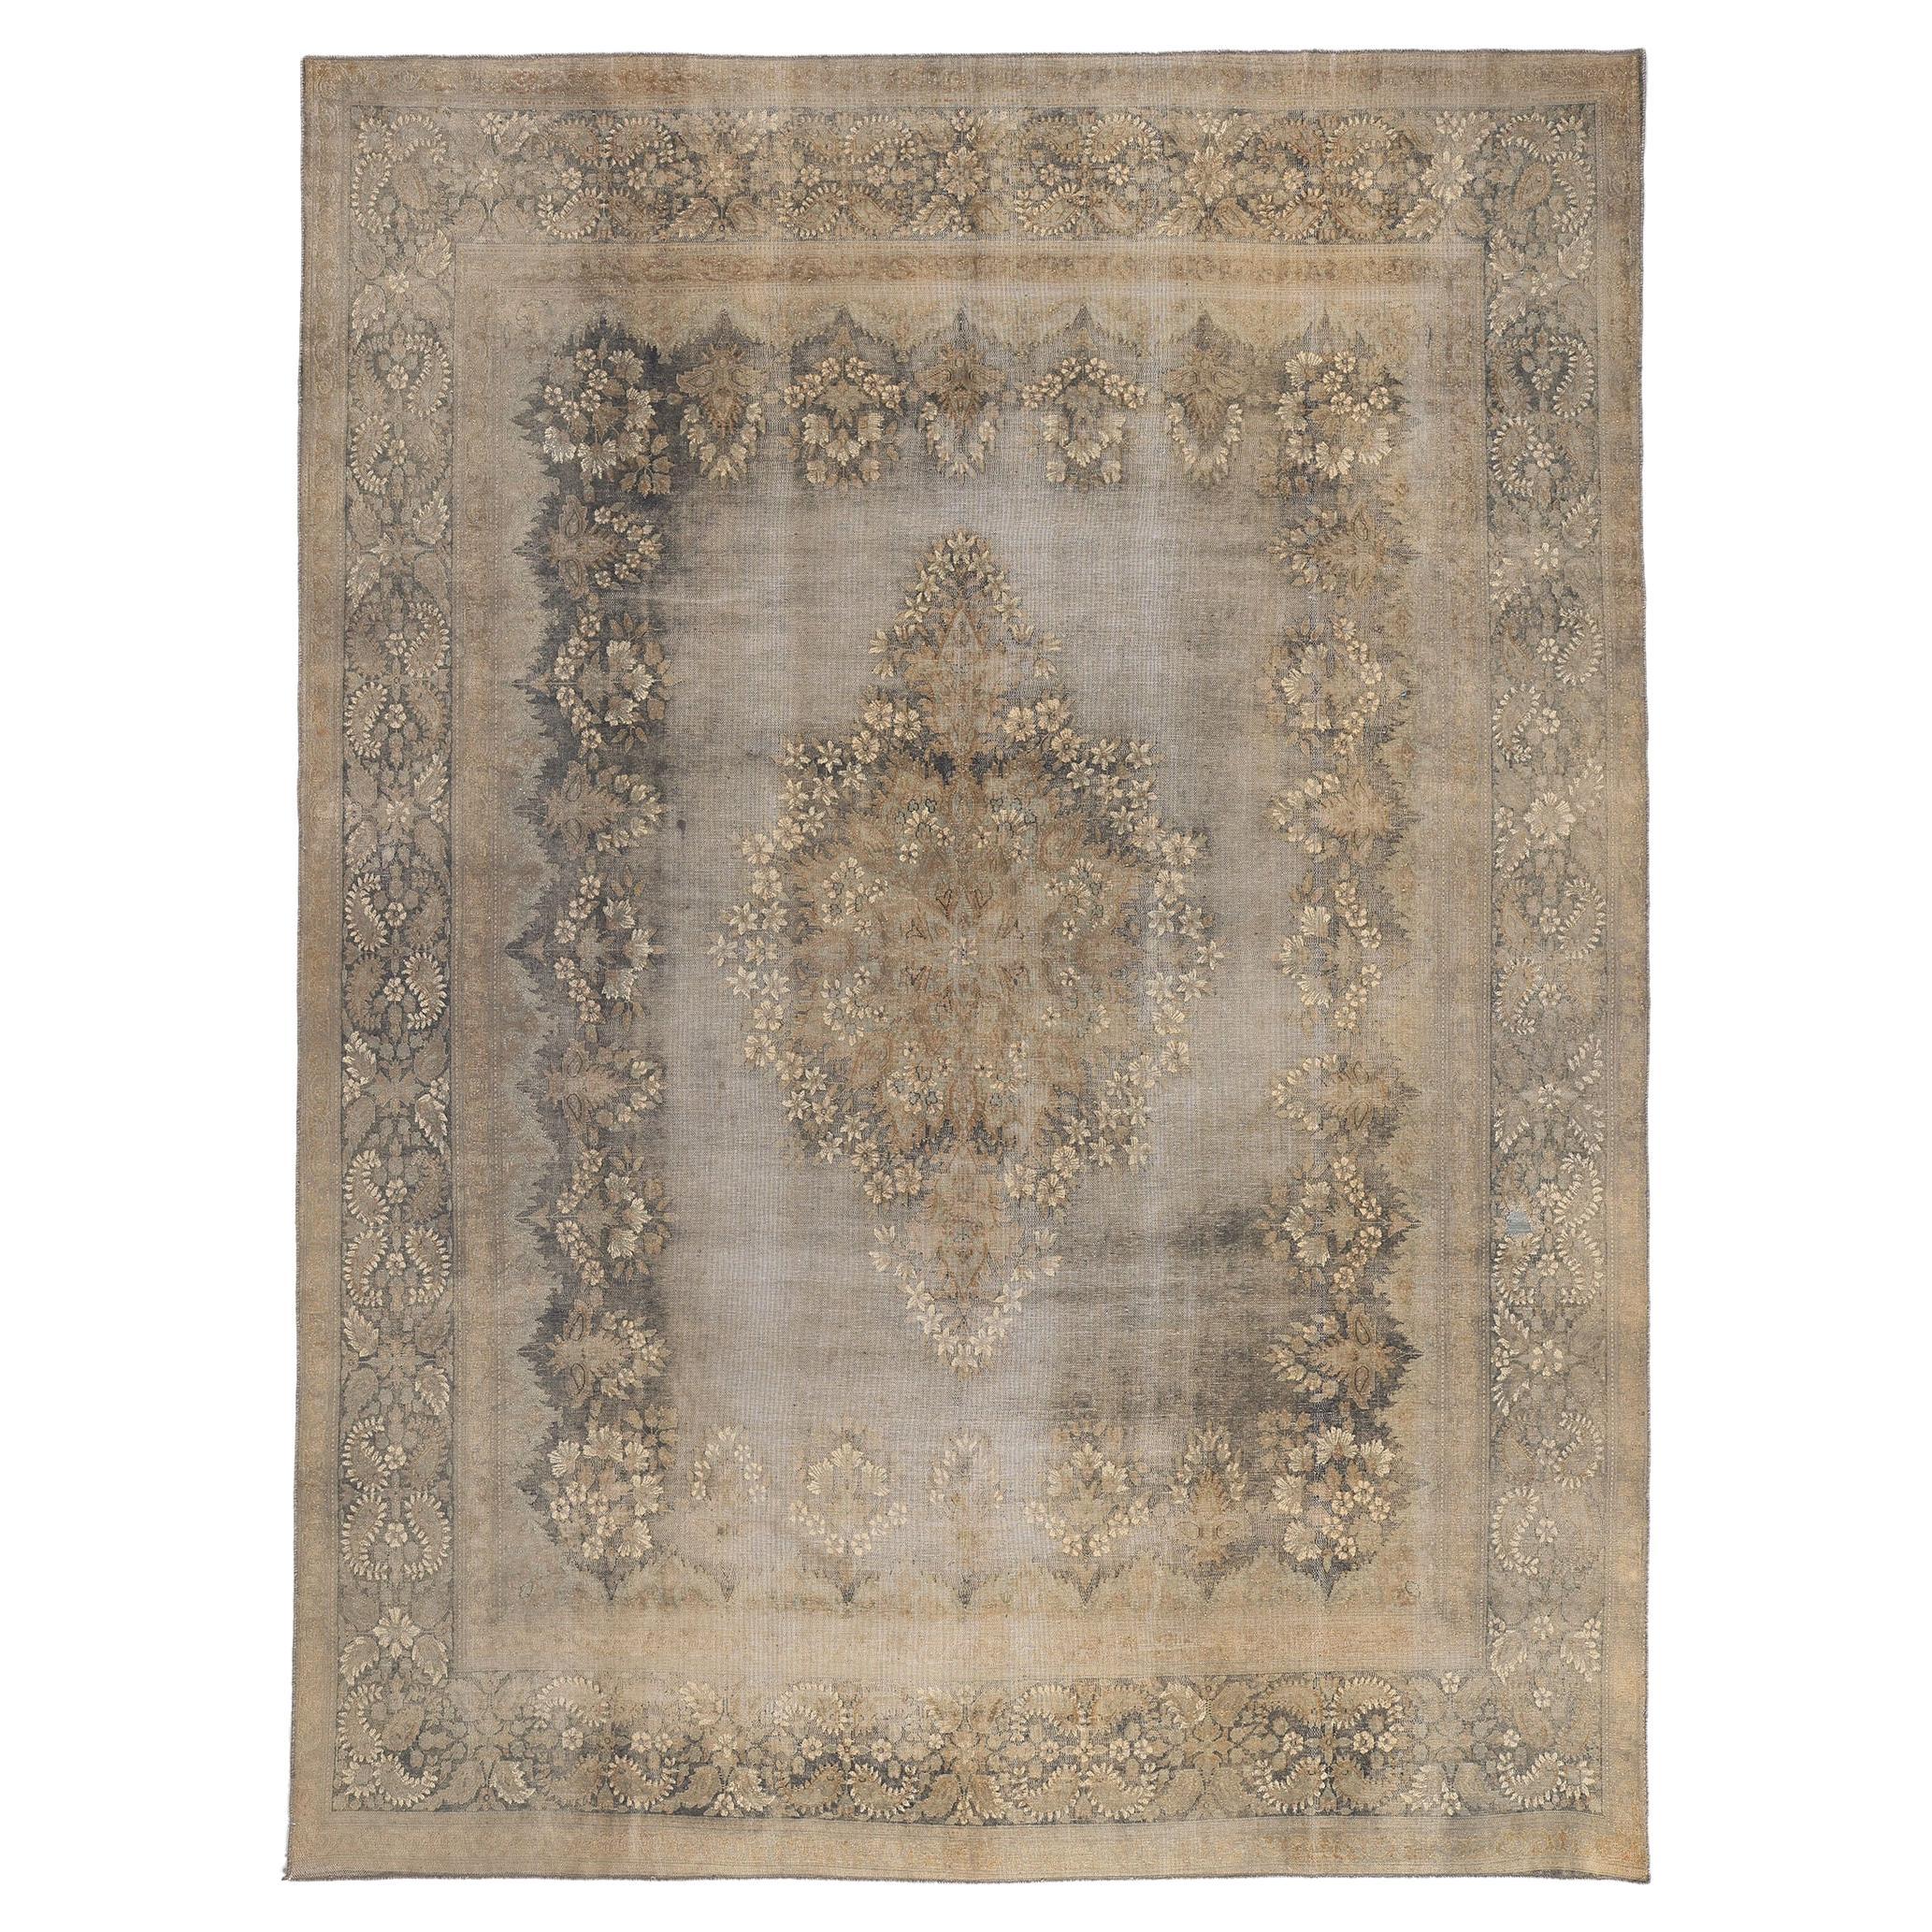 Vintage Turkish Overdyed Rug, American Colonial Revival Meets Modern Industrial